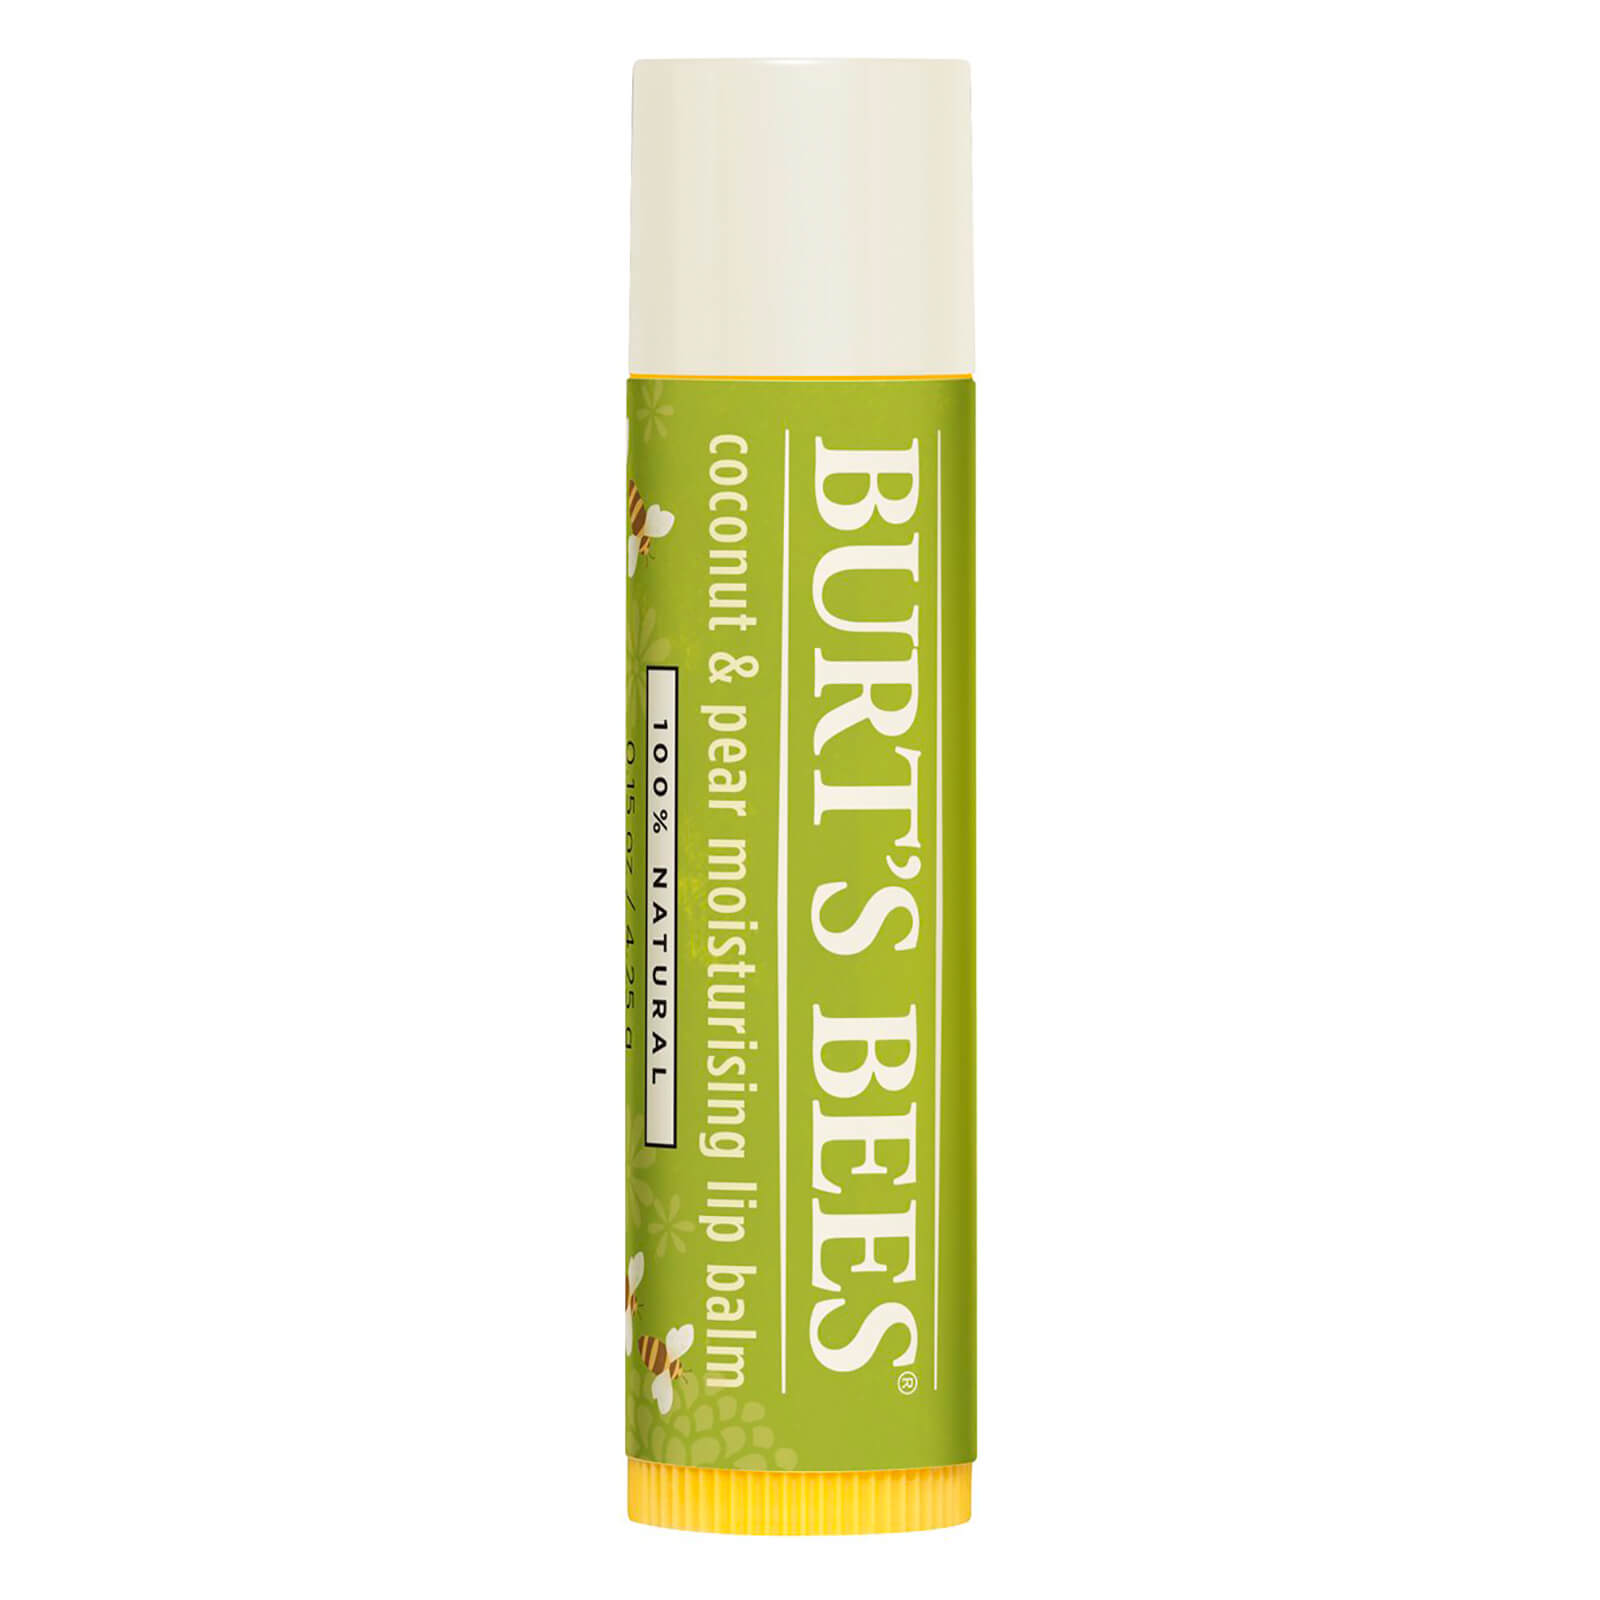 Burt's Bees Bring Back the Bees Lip Balm - Coconut & Pear